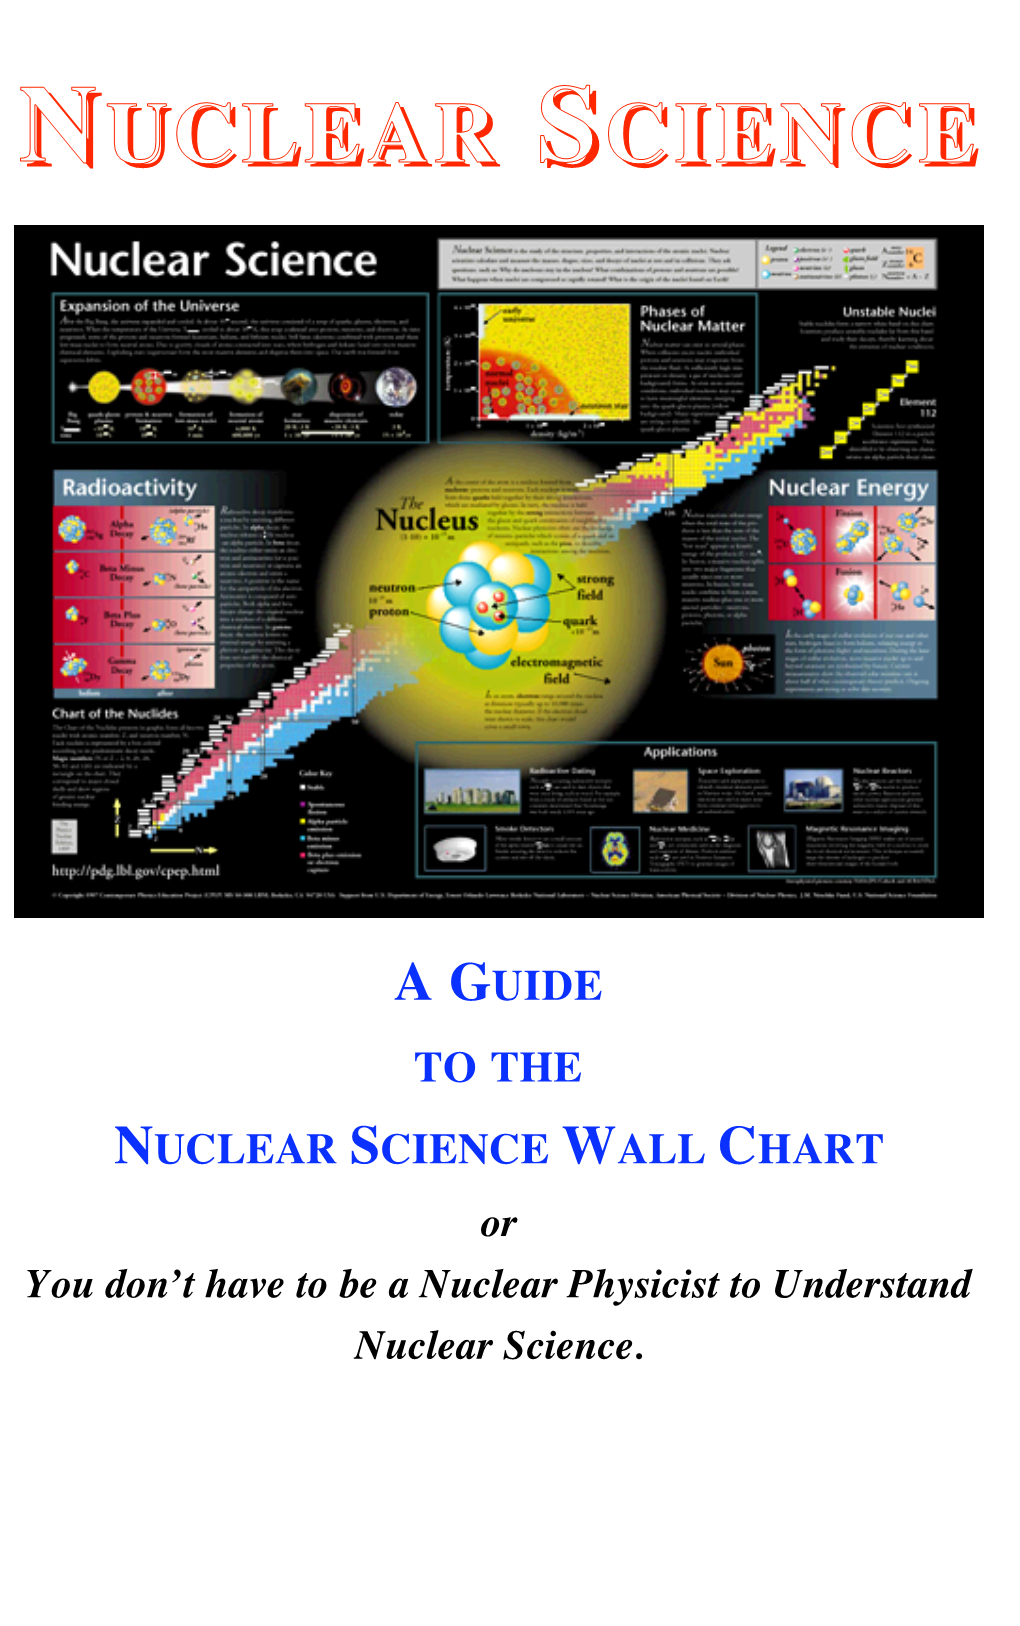 NUCLEAR SCIENCE WALL CHART Or You Don’T Have to Be a Nuclear Physicist to Understand Nuclear Science